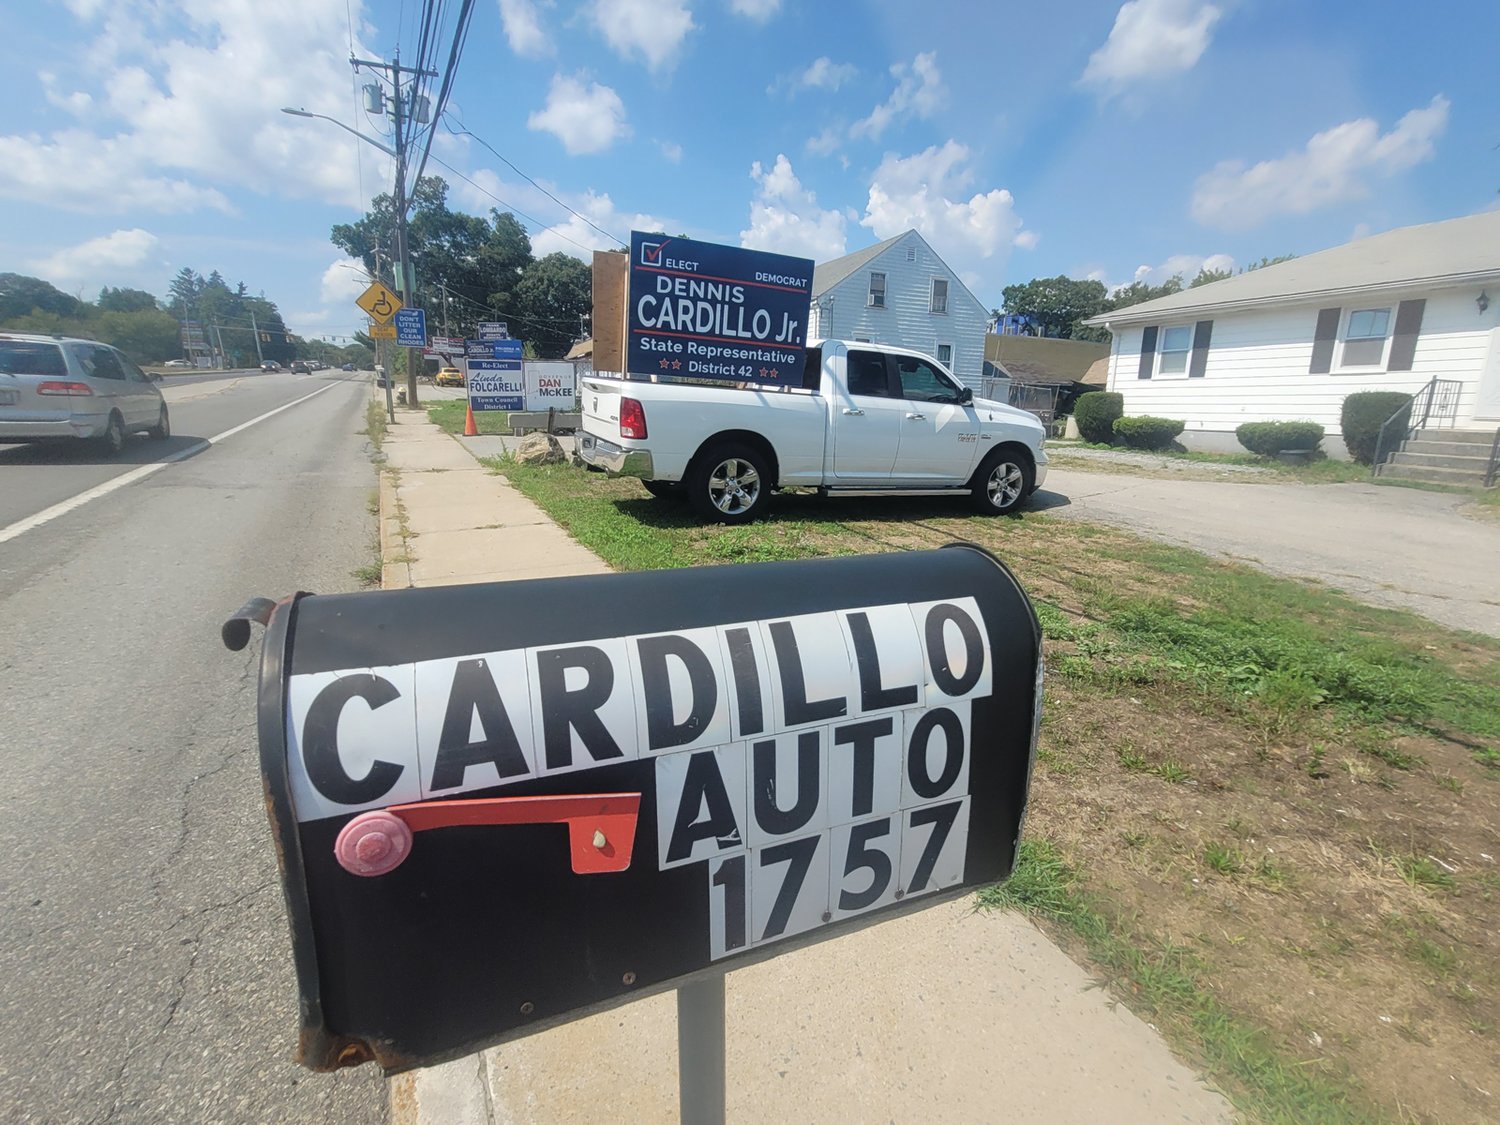 RESIDENCY CONFUSION: Dennis Cardillo Jr. admits he does not live at 1757 Plainfield Pike. His father Dennis Cardillo Sr. (Rep. Cardillo’s brother) answered the door at the home last week. Dennis Cardillo Jr. says he’d like to keep his current address secret, to prevent further “harassment” from his political opponent, and uncle, Rep. Ed Cardillo.